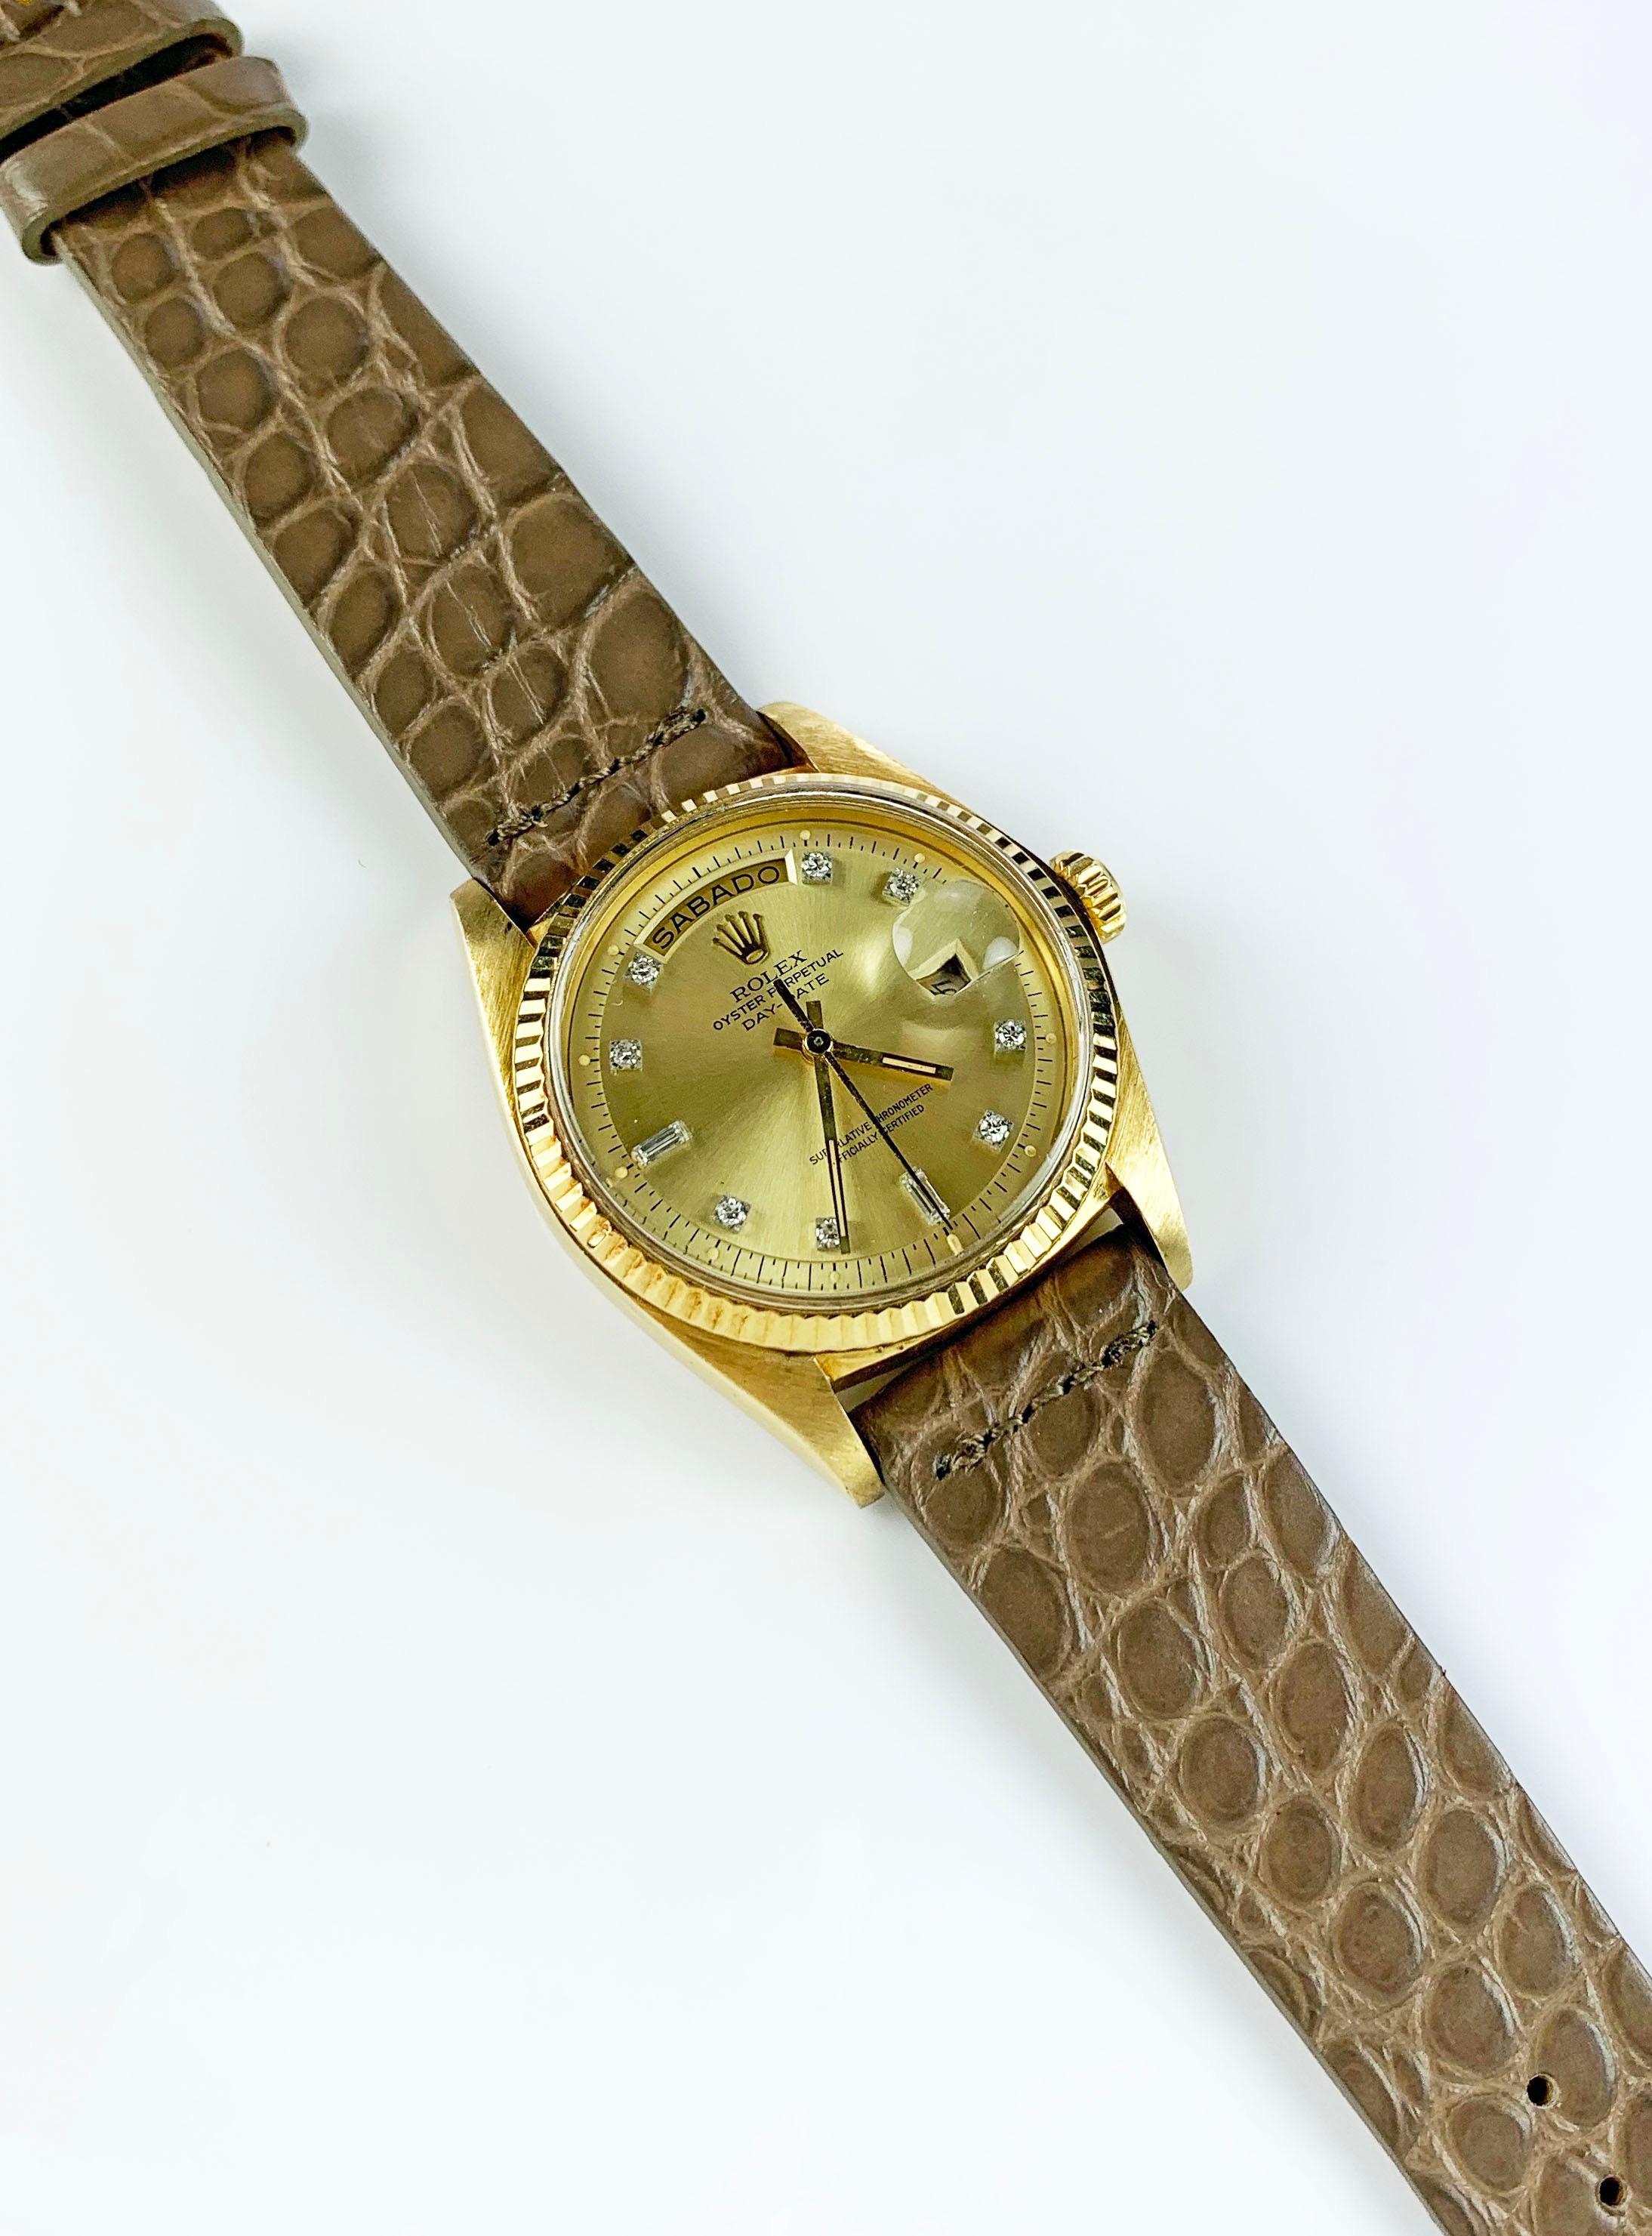 Rolex 18K Yellow Gold Day-Date Presidential Watch from the Early 1970's
Beautiful Factory Champagne Diamond Dial.
Yellow Gold Gold Fluted Bezel
18K Yellow Gold Case
36mm in size 
Features Rolex Automatic Movement with Calibre 1556 with Non-Quick Day